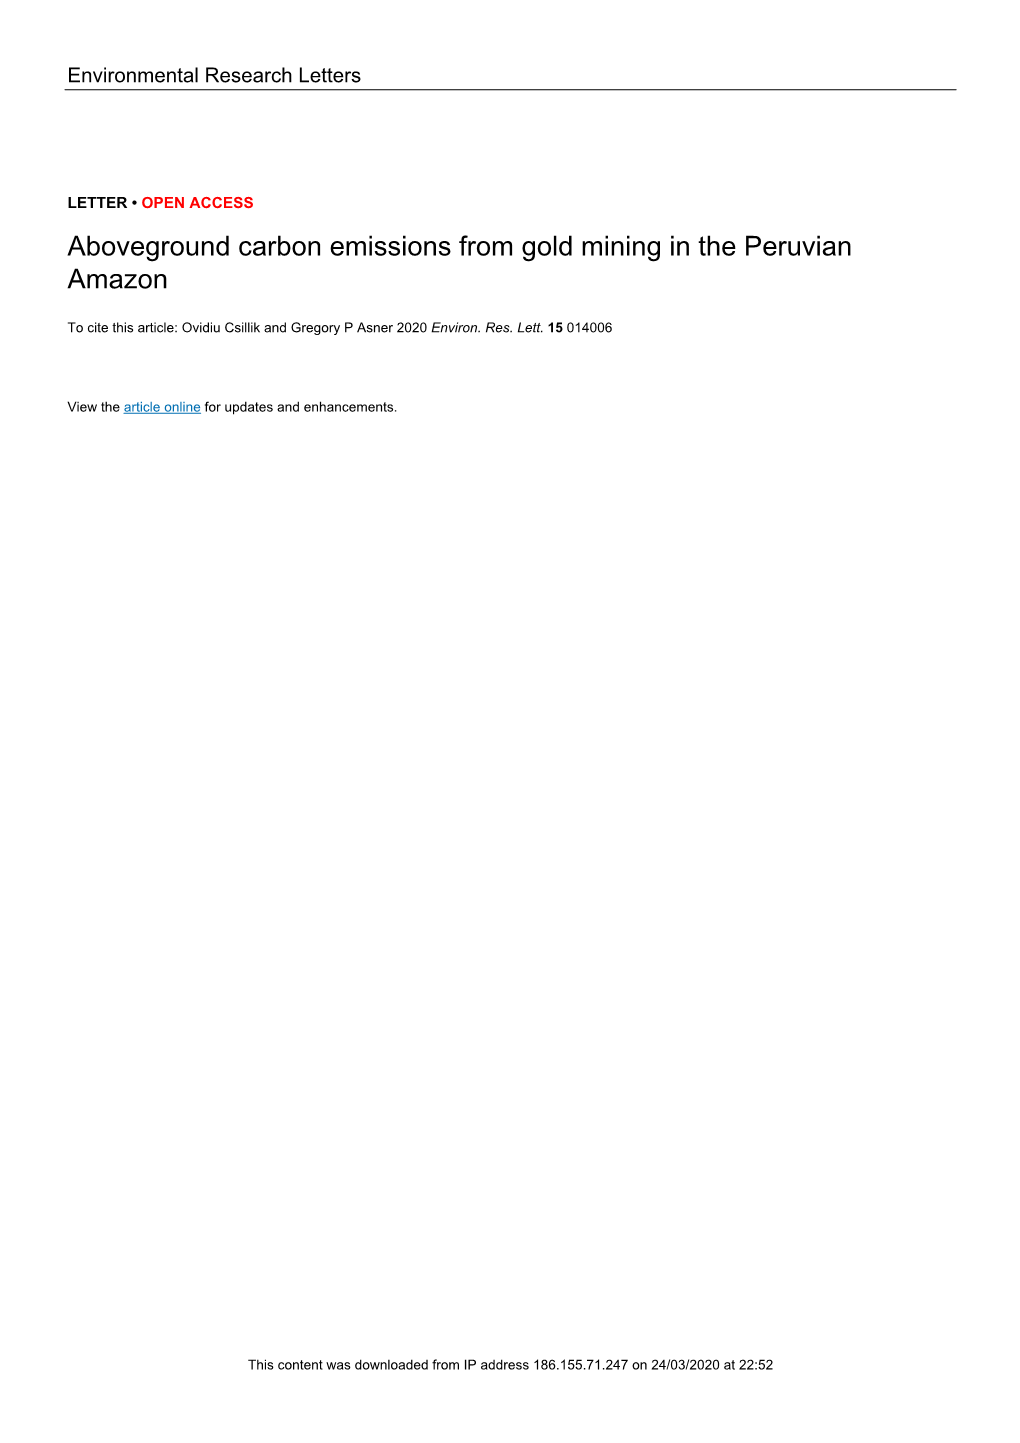 Aboveground Carbon Emissions from Gold Mining in the Peruvian Amazon